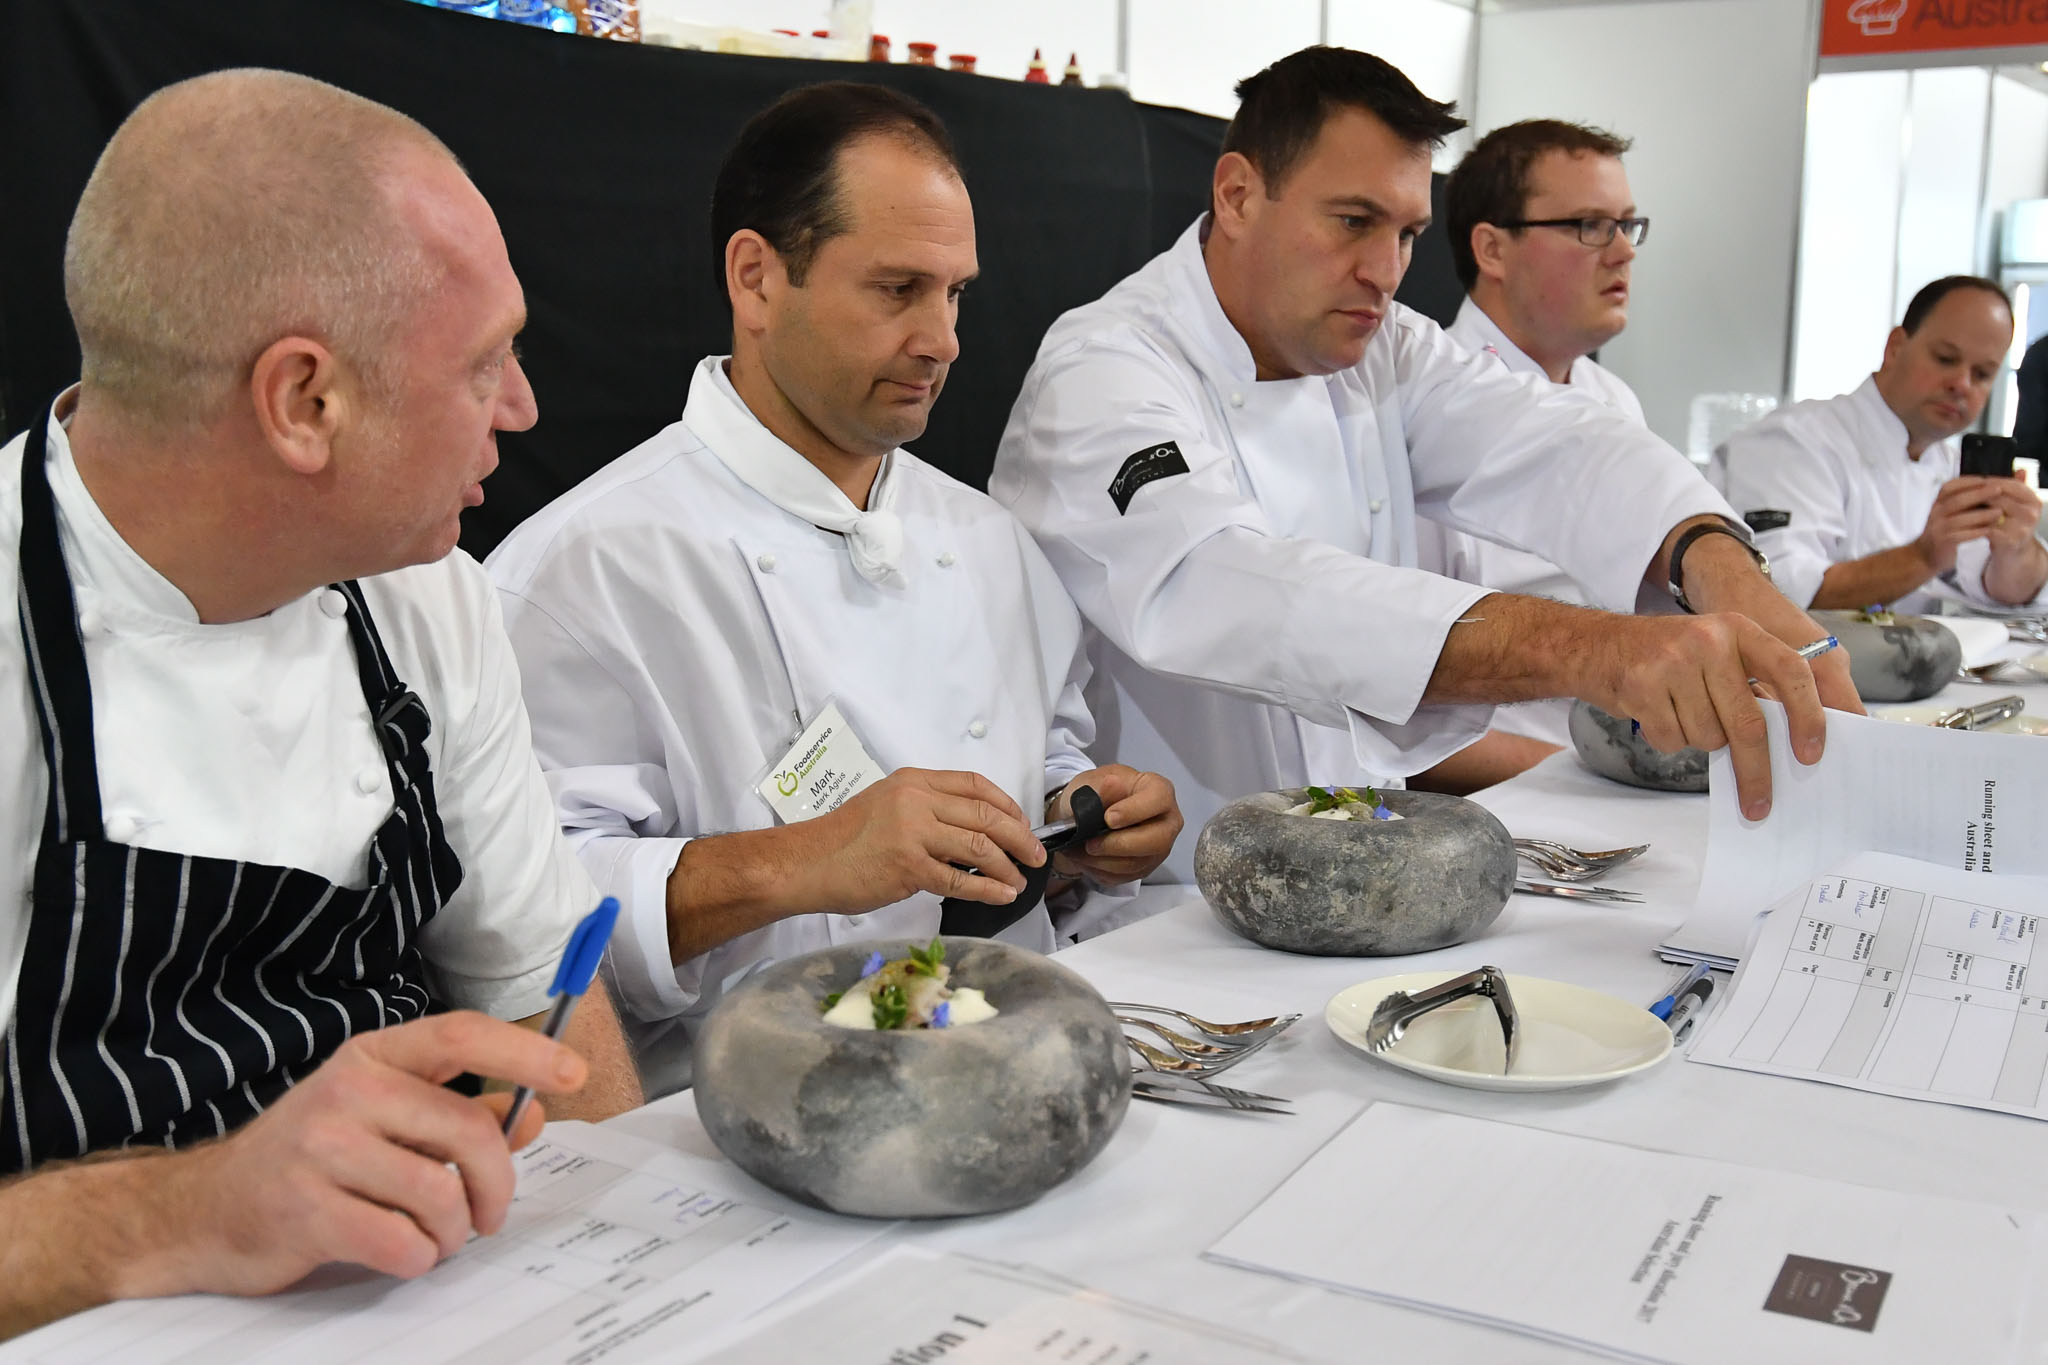 Melbourne, 30 May 2017 - The judges prepare to taste the fish dish of Michael Cole of the Georgie Bass Café & Cookery in Flinders at the Australian selection trials of the Bocuse d'Or culinary competition held during the Food Service Australia show at the Royal Exhibition Building in Melbourne, Australia. Photo Sydney Low